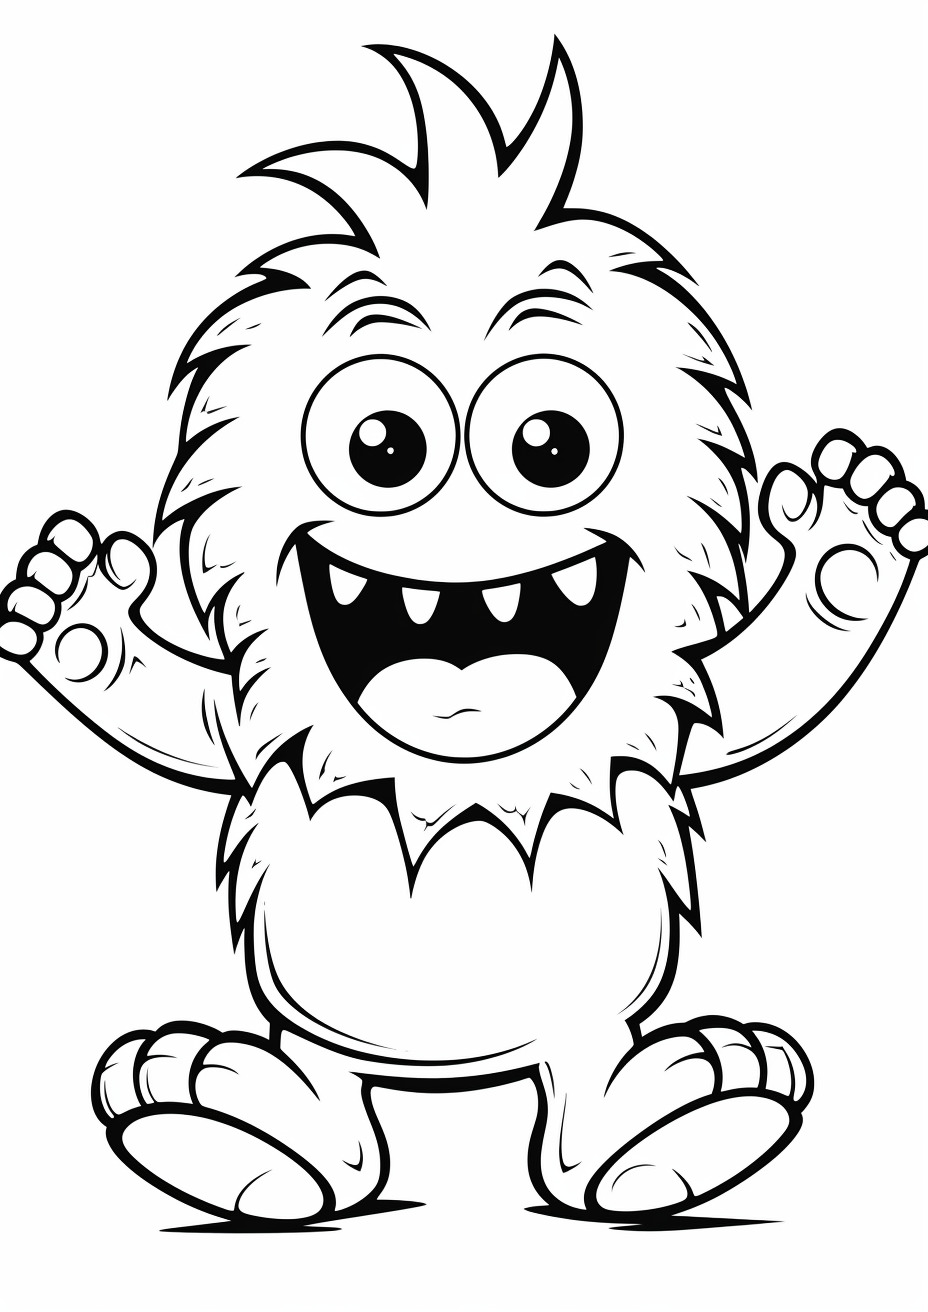 coloring page of a cute monster dancing and jumping joyfully